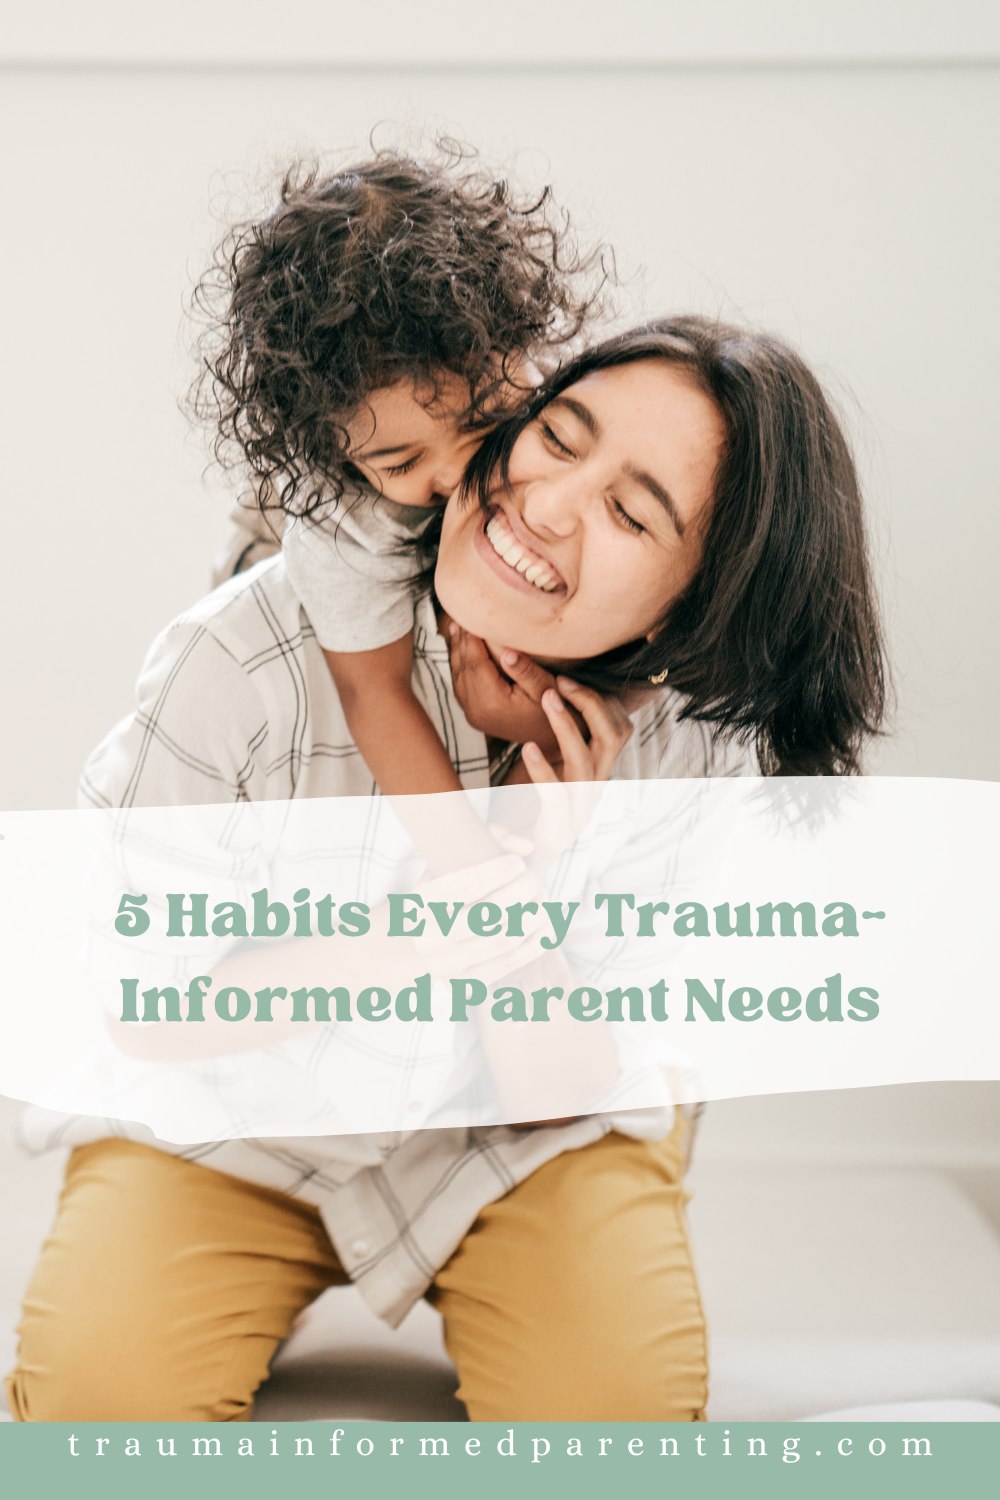 5 Habits Every Trauma-Informed Parent Needs To Practice